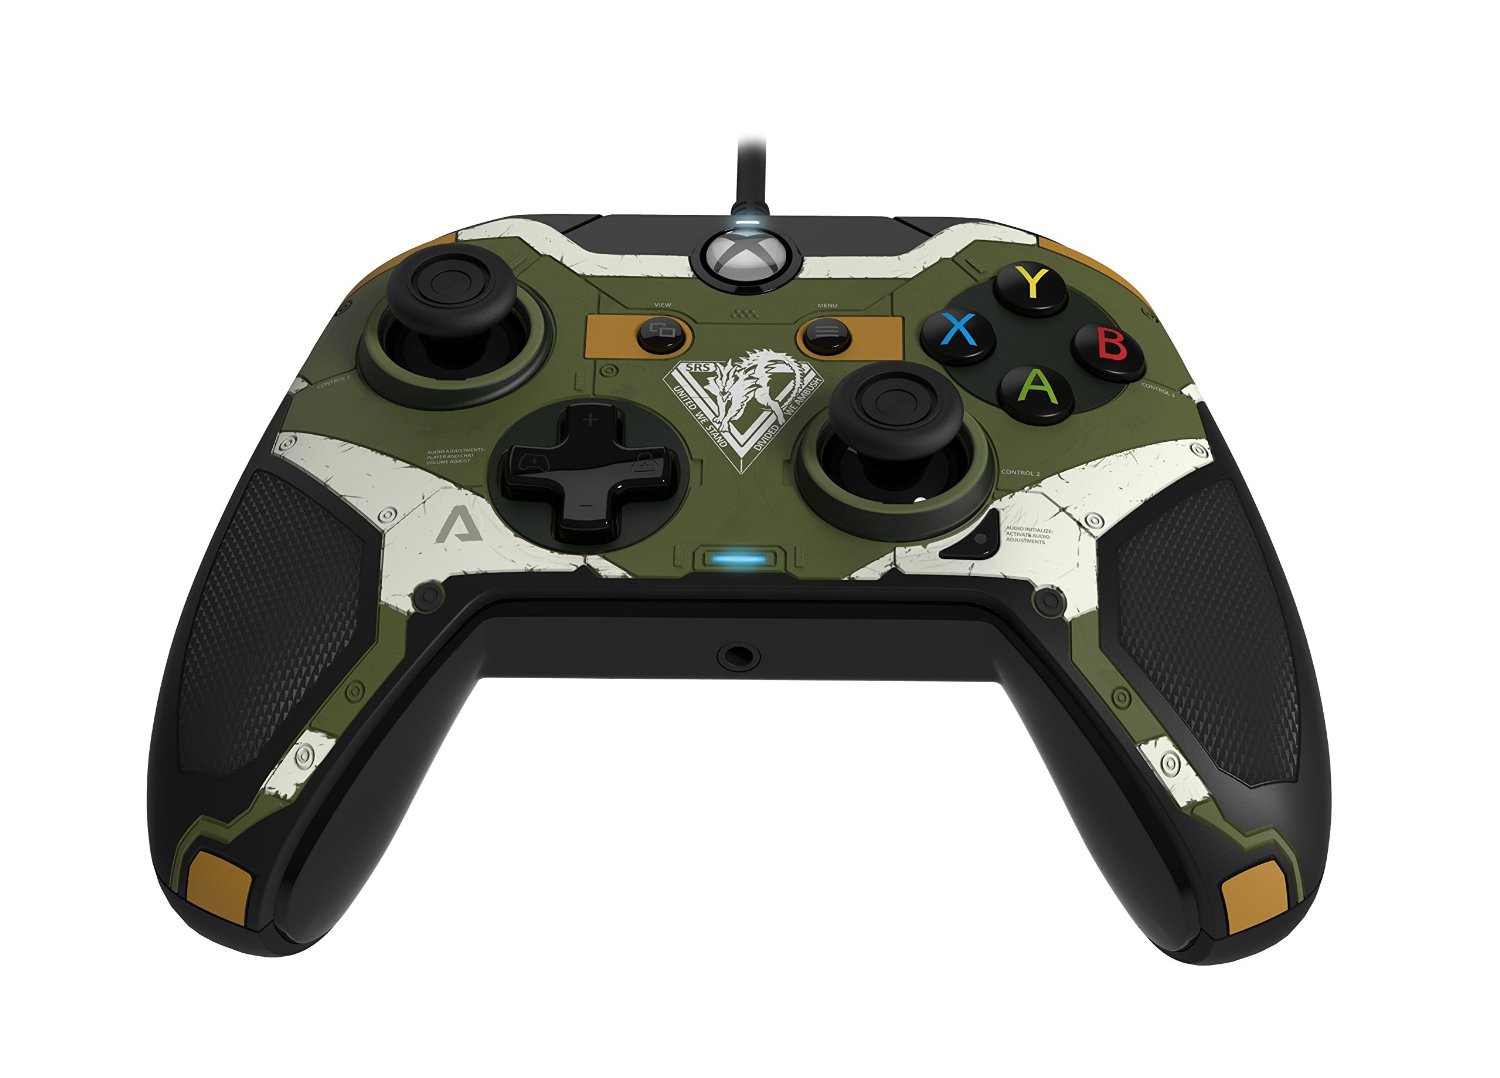 Xbox второй джойстик. Геймпад Xbox Titanfall. PDP NFL face-off Xbox Controller. Microsoft Xbox one s/x Wireless Controller Call of Duty / Titanfall AW Xbox one. Xbox Titanfall Controller фото.